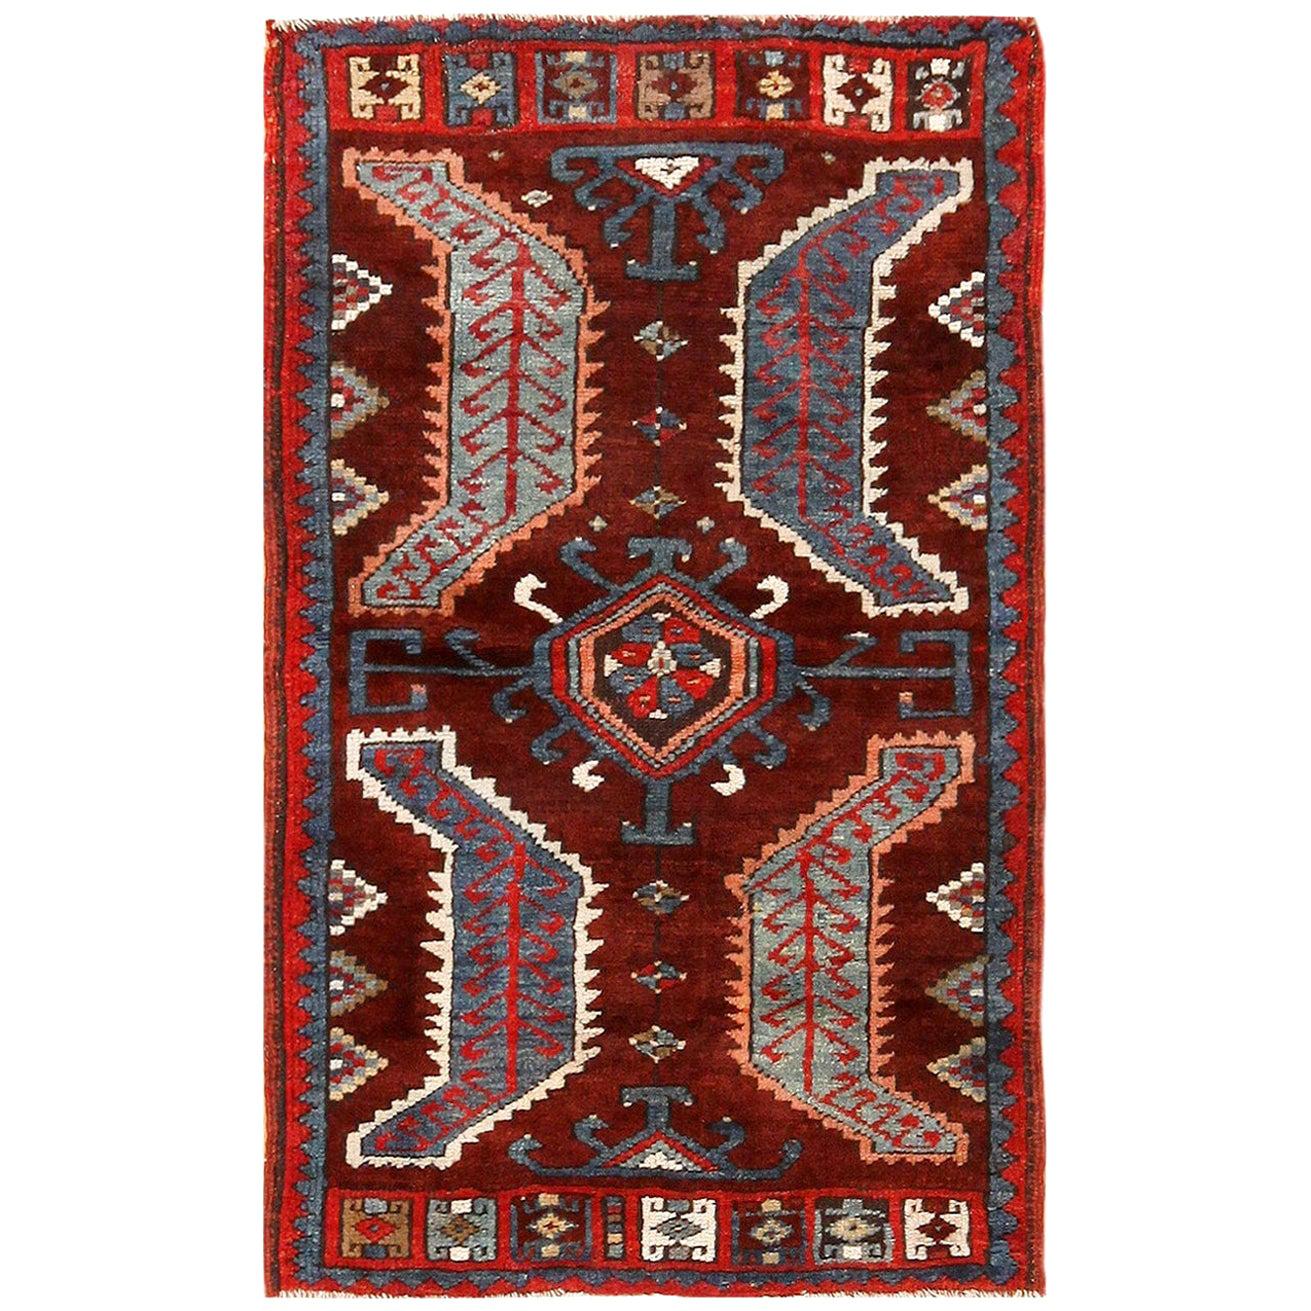 Small Antique Turkish Yastic Rug. Size: 2 ft 1 in x 3 ft 3 in (0.63 m x 0.99 m)